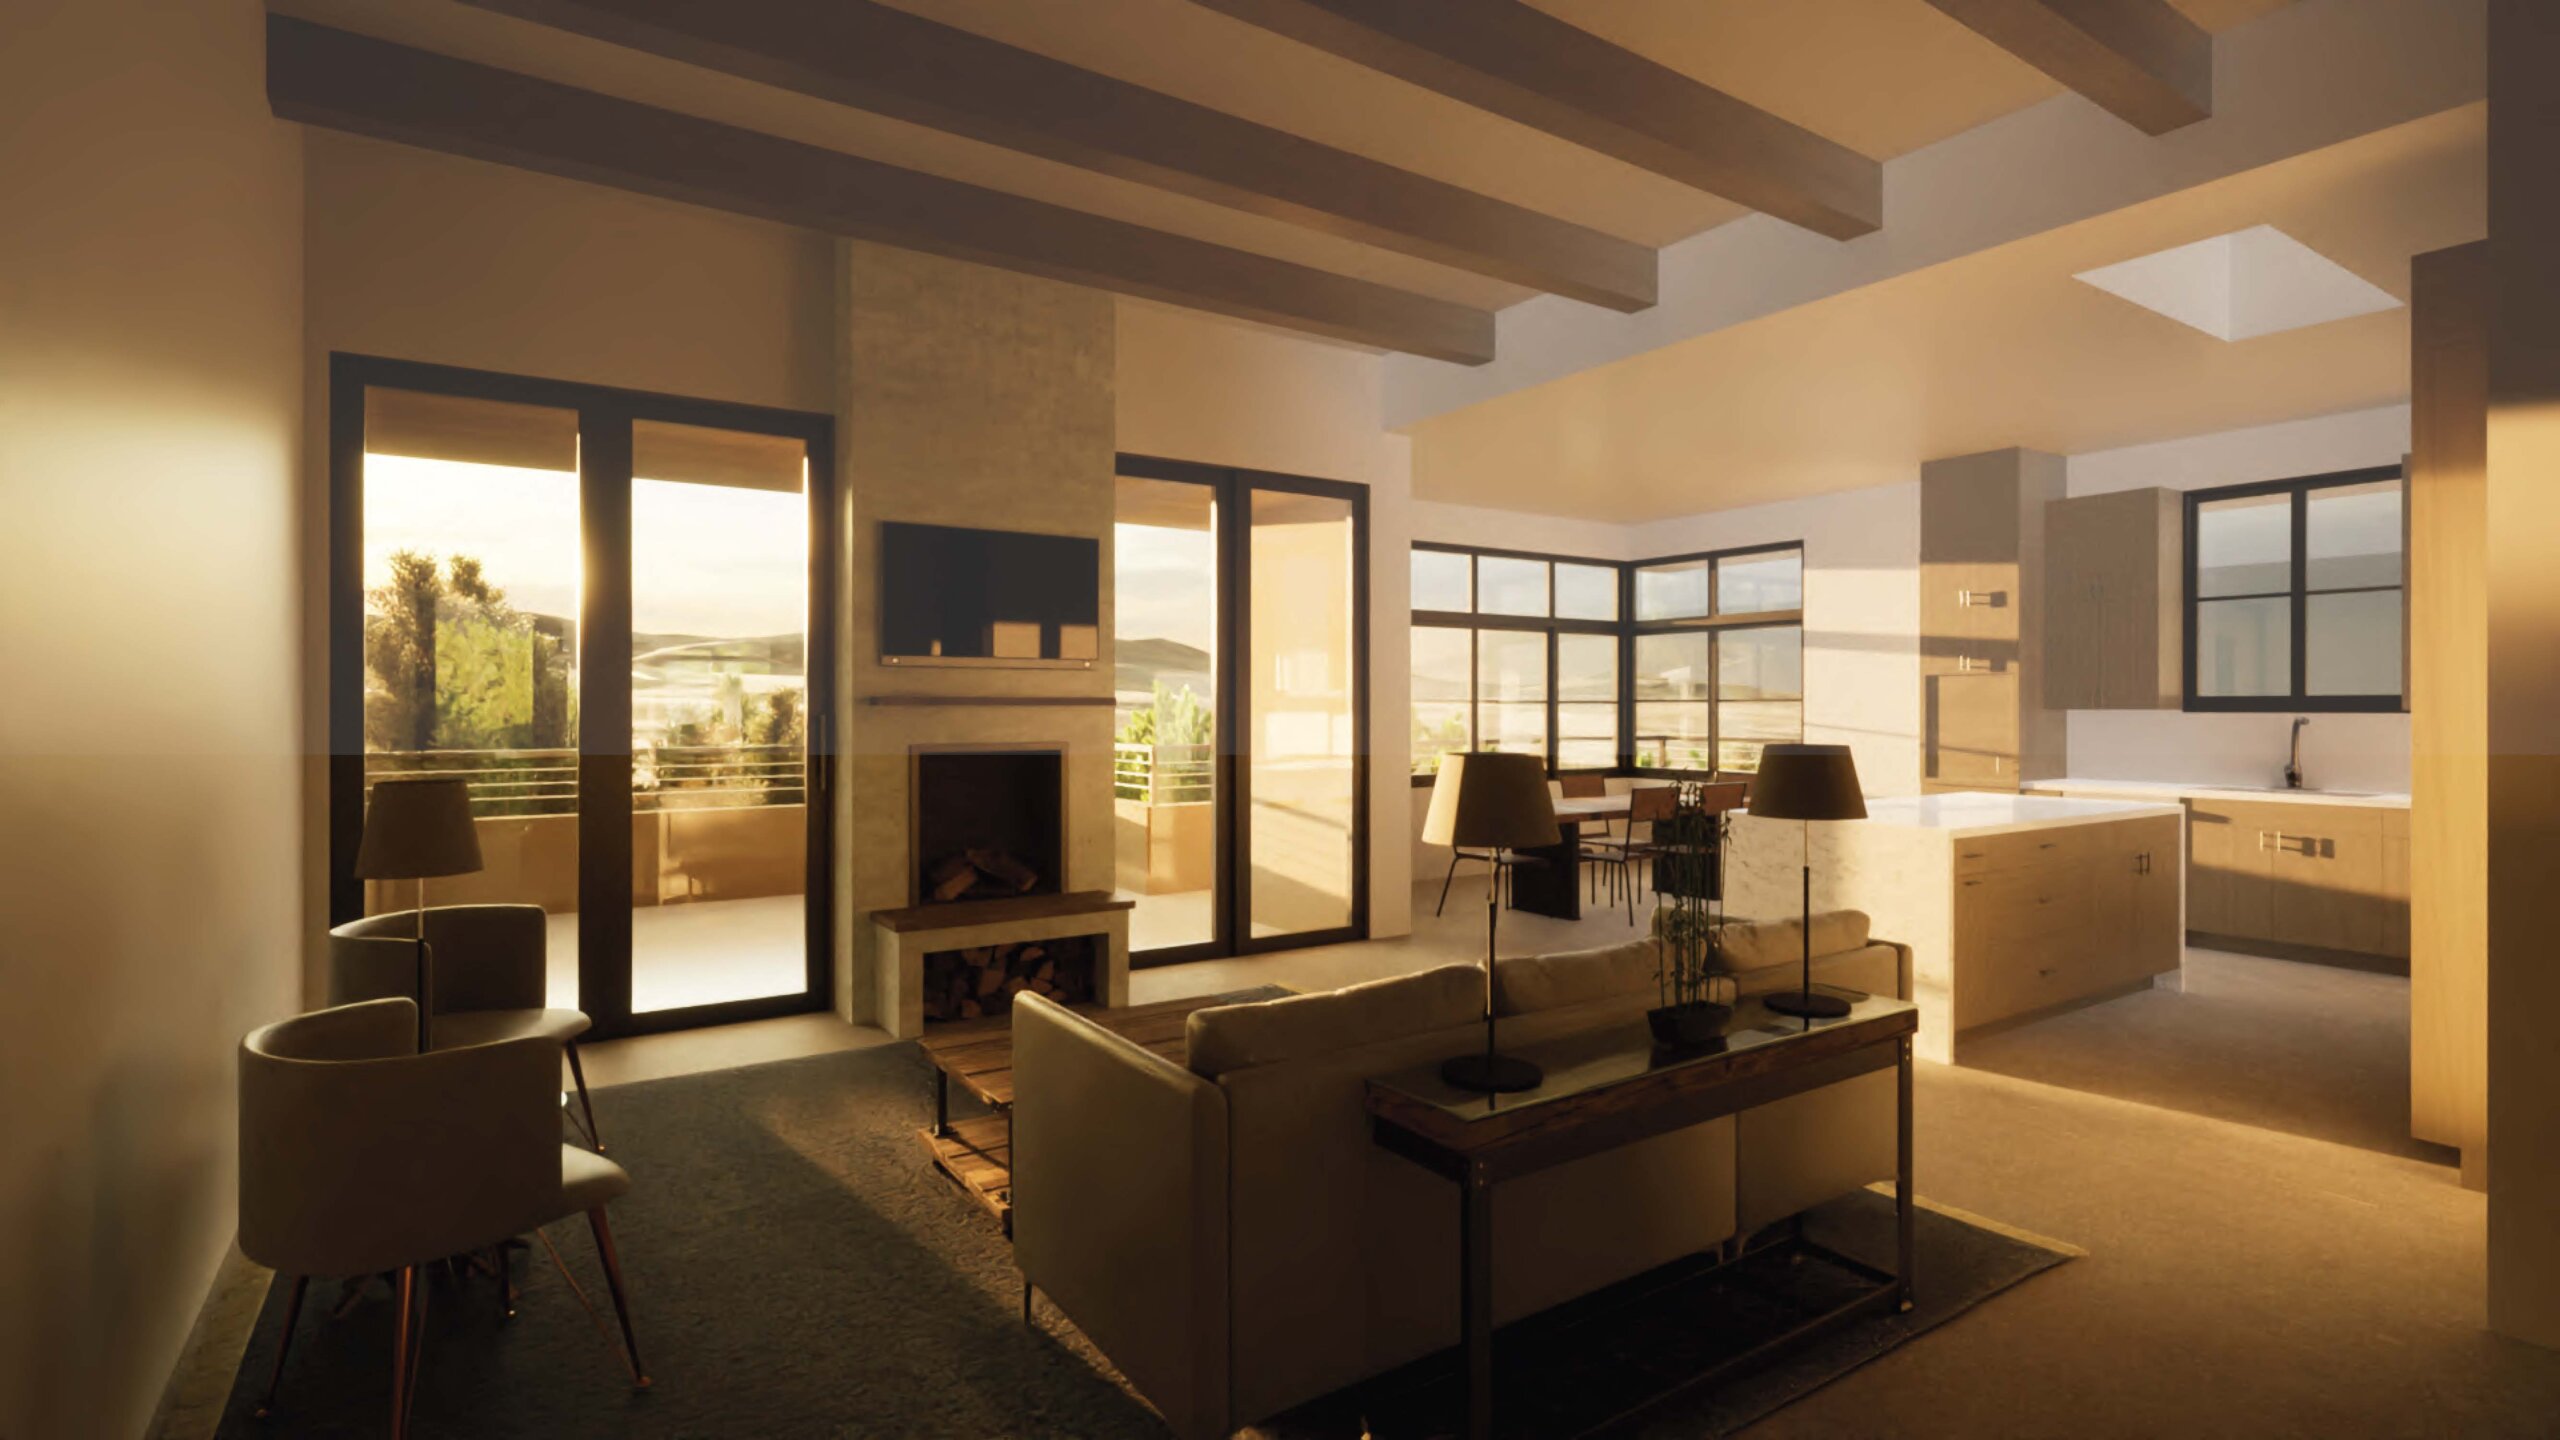 A 3D rendering of a Santa Fe style living room and kitchen.